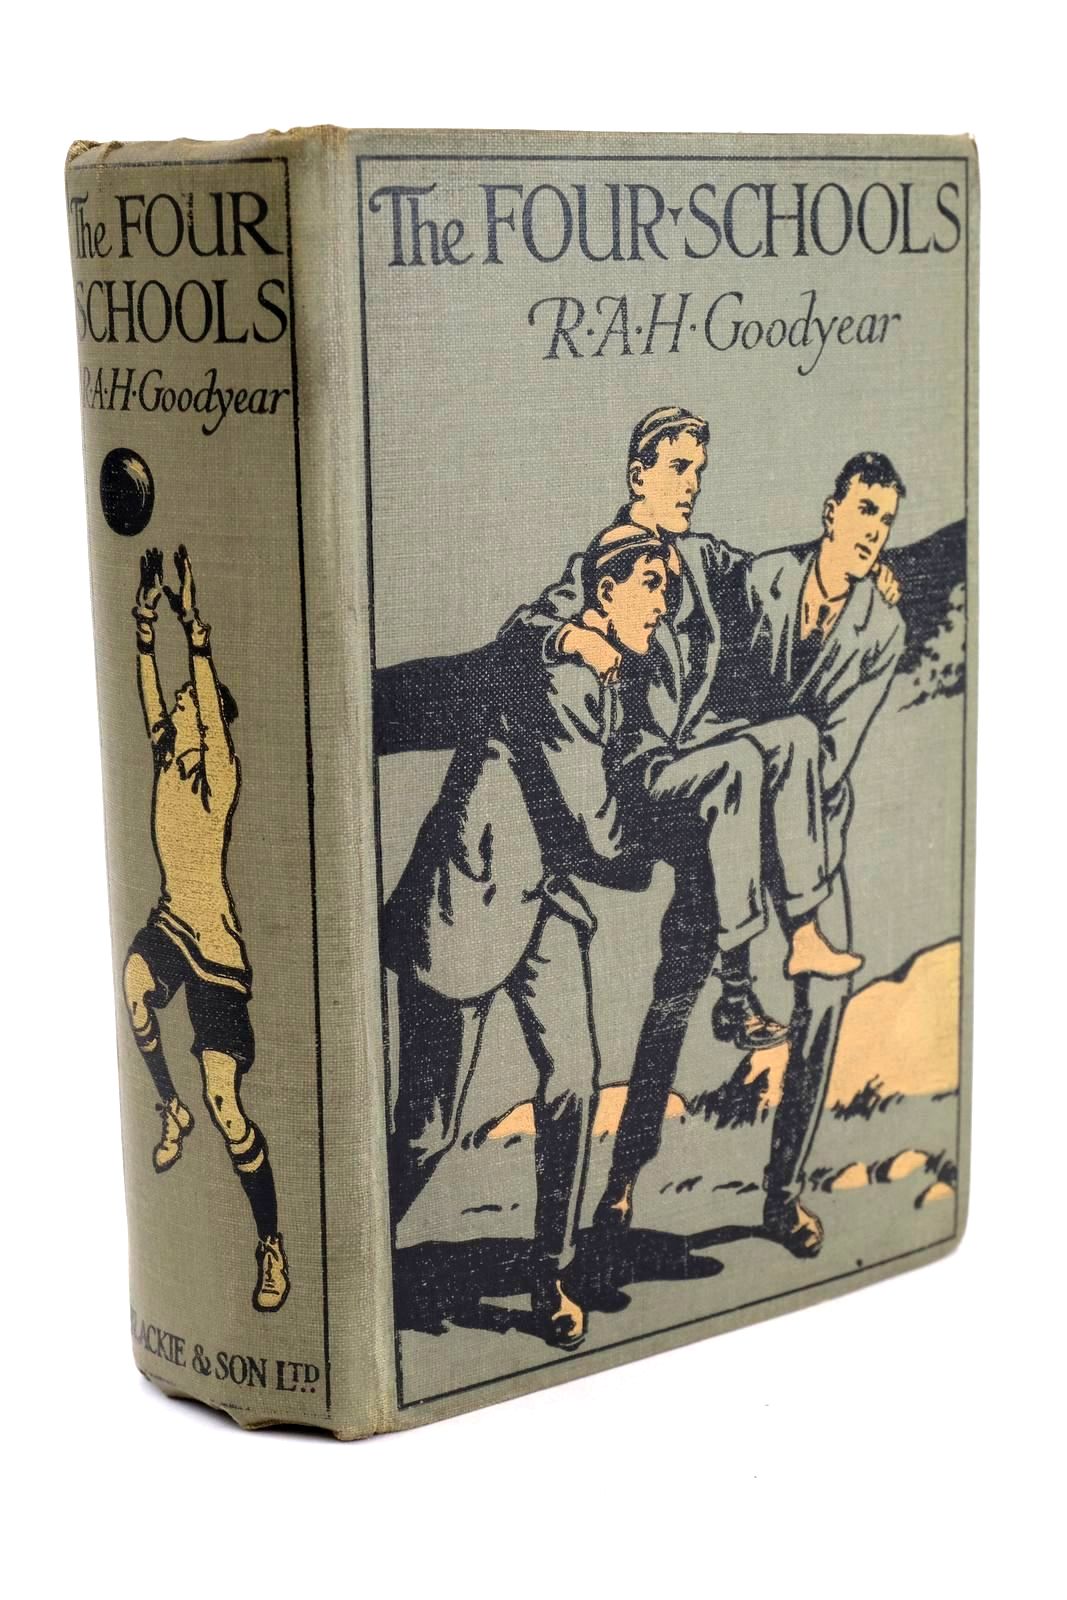 Photo of THE FOUR SCHOOLS written by Goodyear, R.A.H. illustrated by Whitwell, T.M.R. published by Blackie &amp; Son Ltd. (STOCK CODE: 1324292)  for sale by Stella & Rose's Books